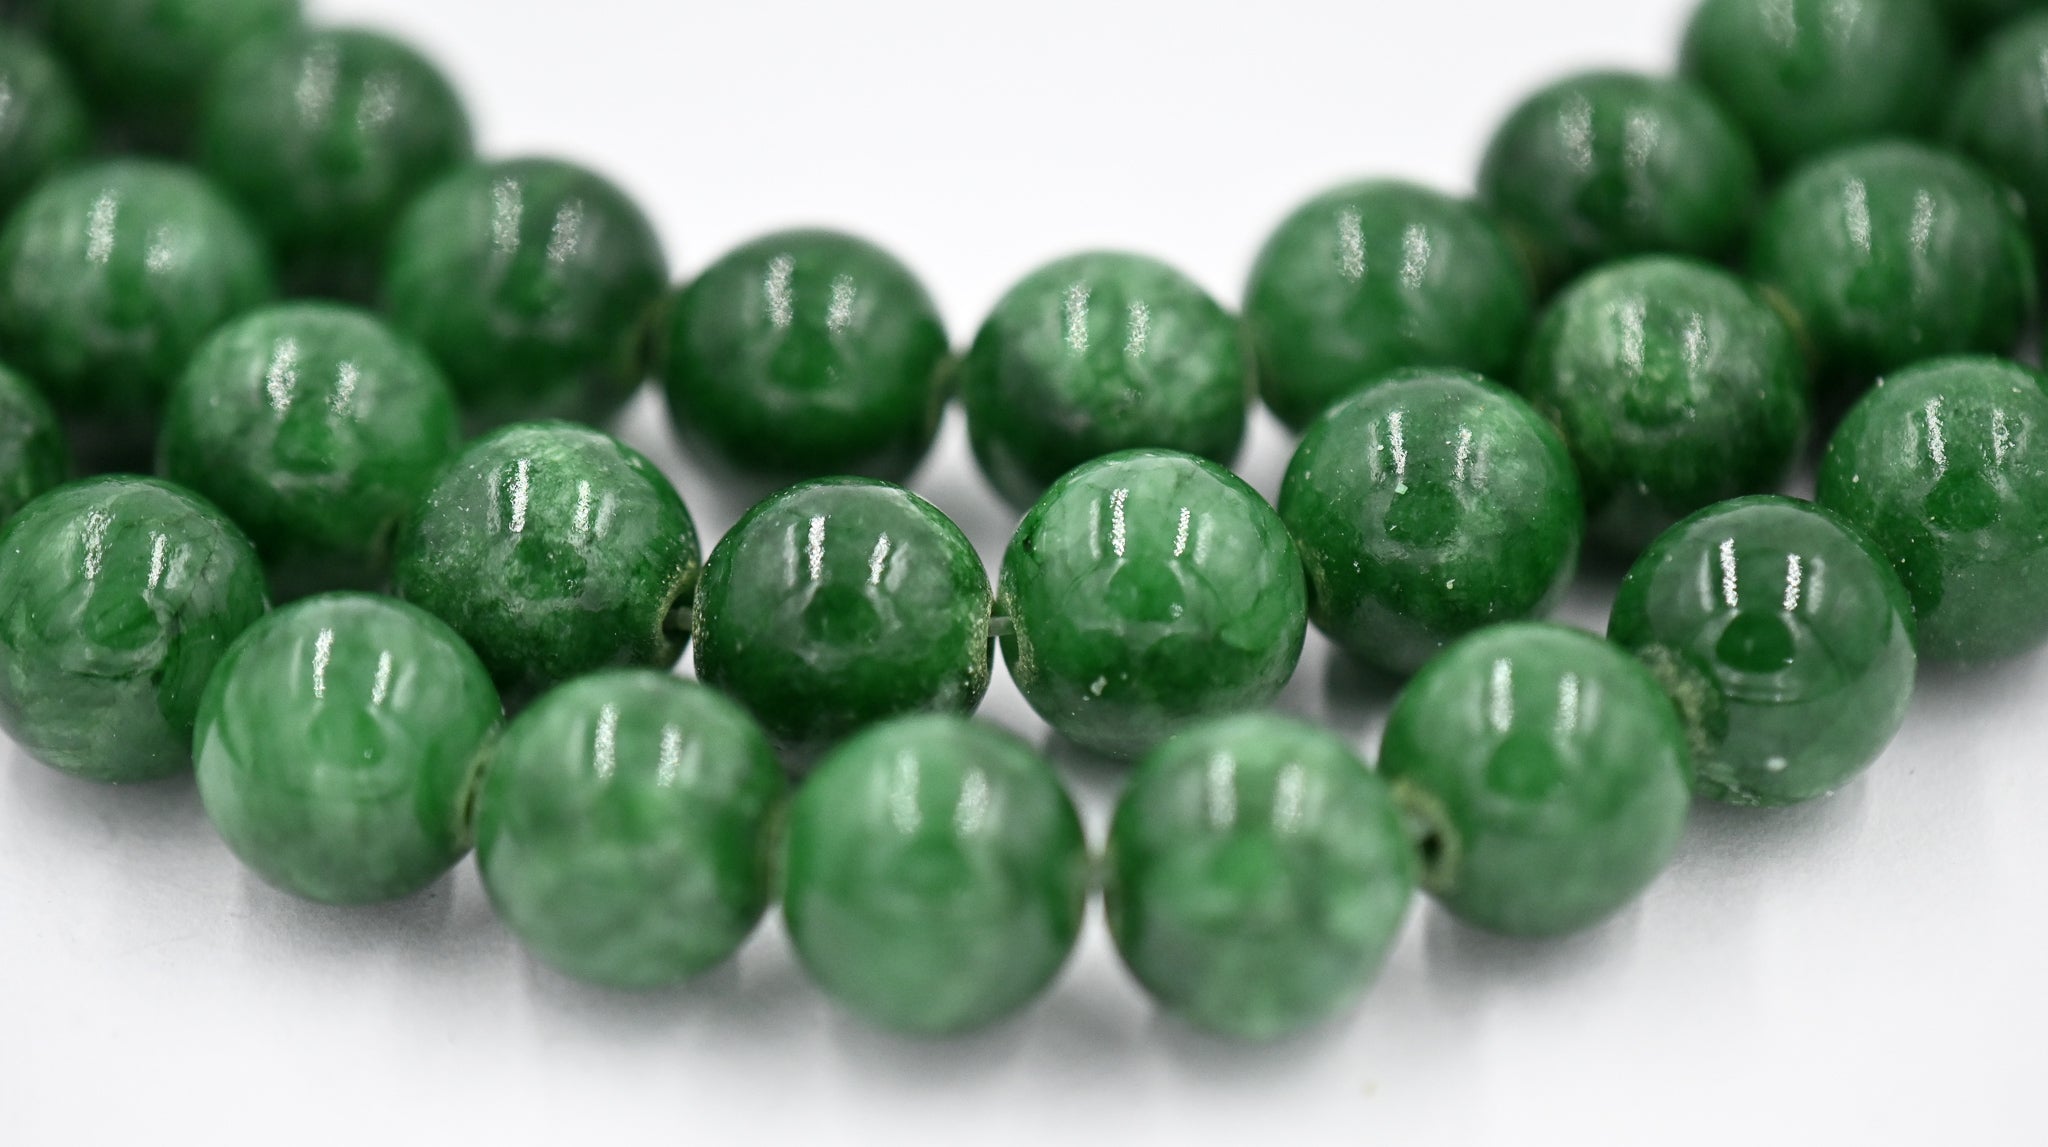 Faceted Emerald Green Jade Round Beads 15 Strand 3mm 4mm 6mm 8mm 10mm 12mm  – Eagle Beadz